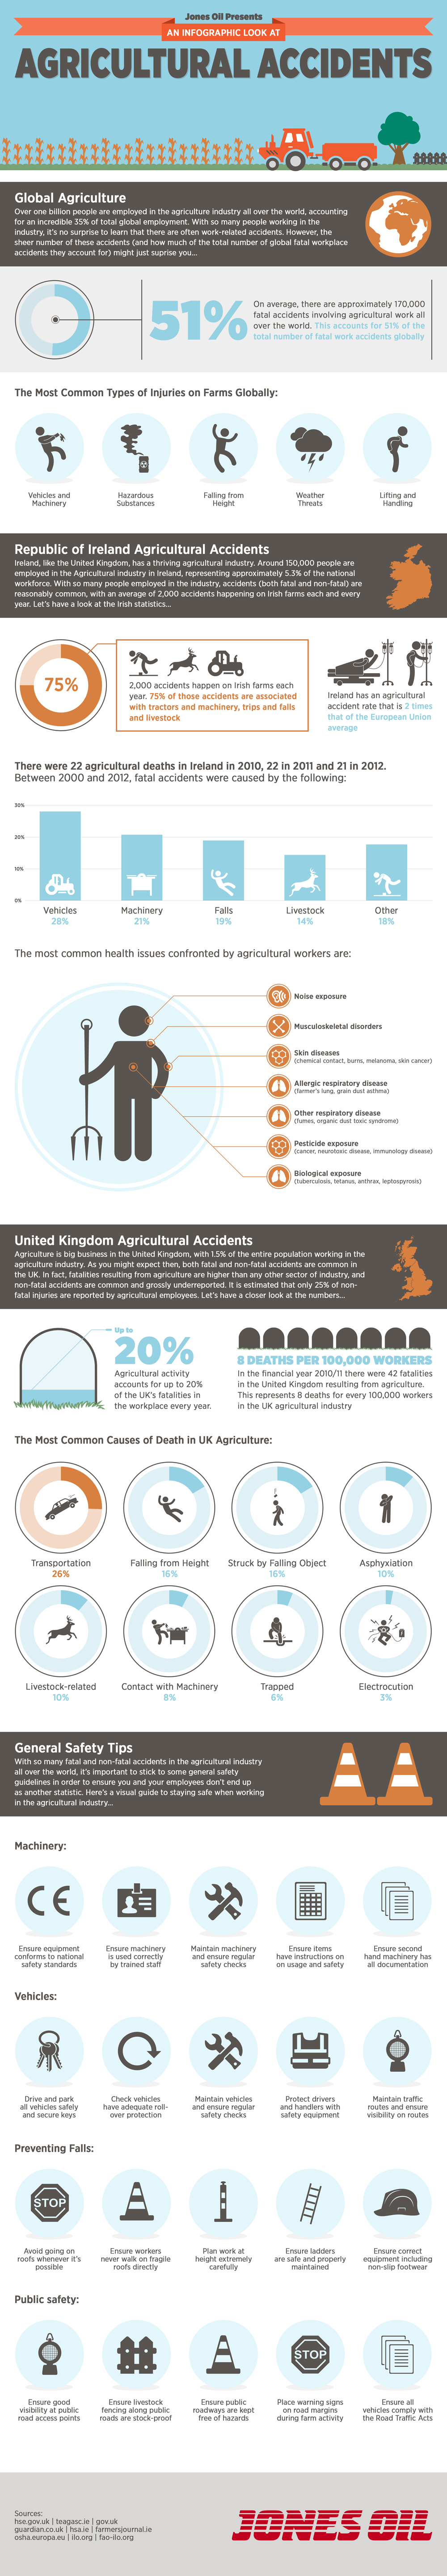 Agricultural Accidents